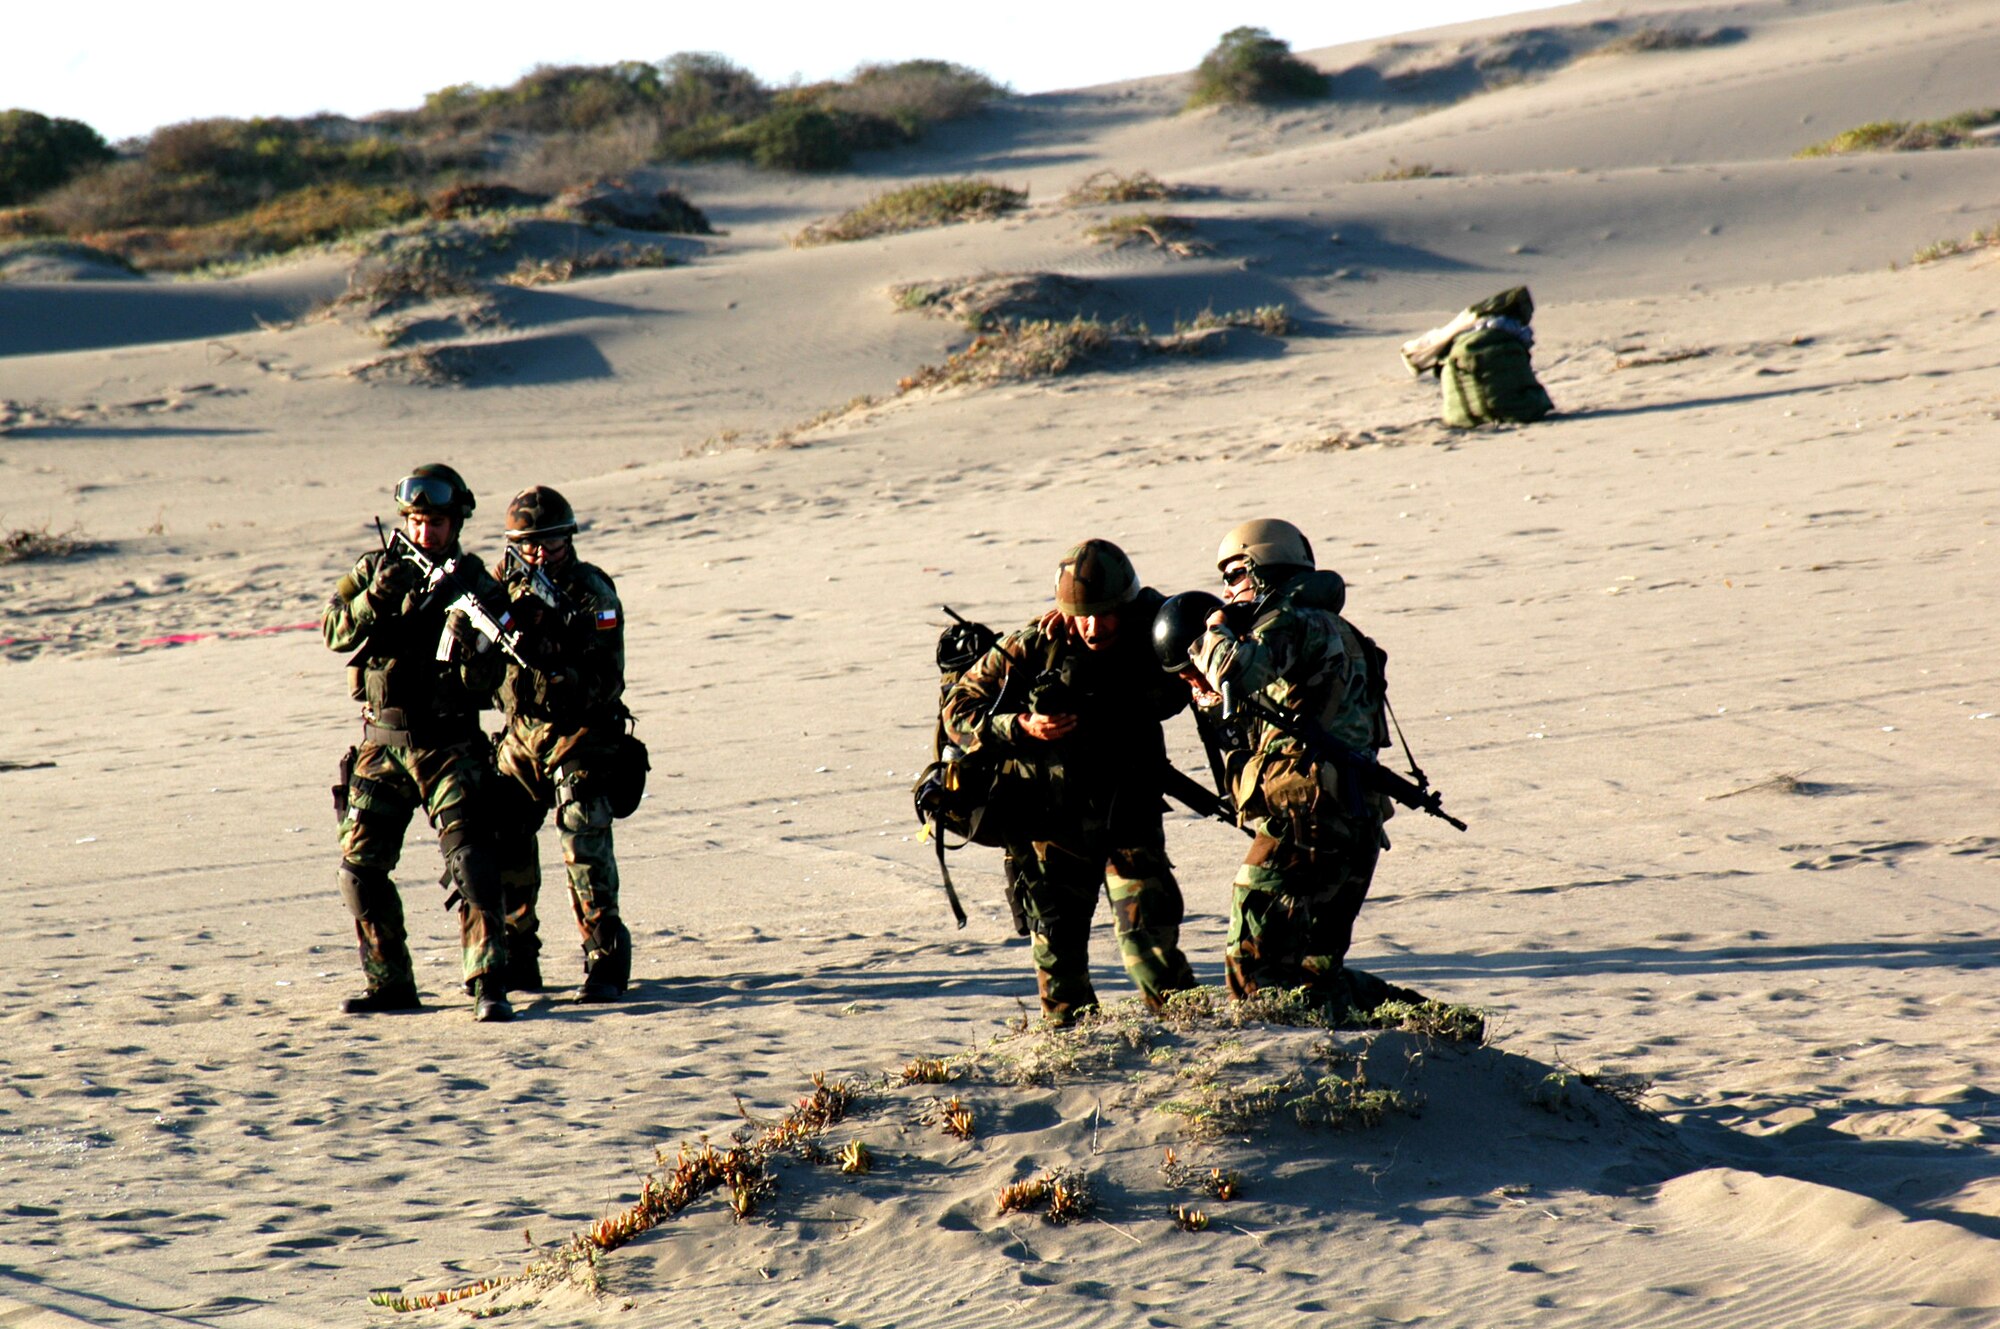 U.S. and Chilean Air Force pararescue personnel participate in a simulated casualty evacuation on the beaches of Quintero, Chile during NEWEN, a three-day combined military exercise, April 8-10.  The NEWEN exercise focused on refueling operations, search and rescue tactics and dissimilar aircraft maneuvers with members of the Chilean Air Force. (photo by U.S. Embassy- Chile)